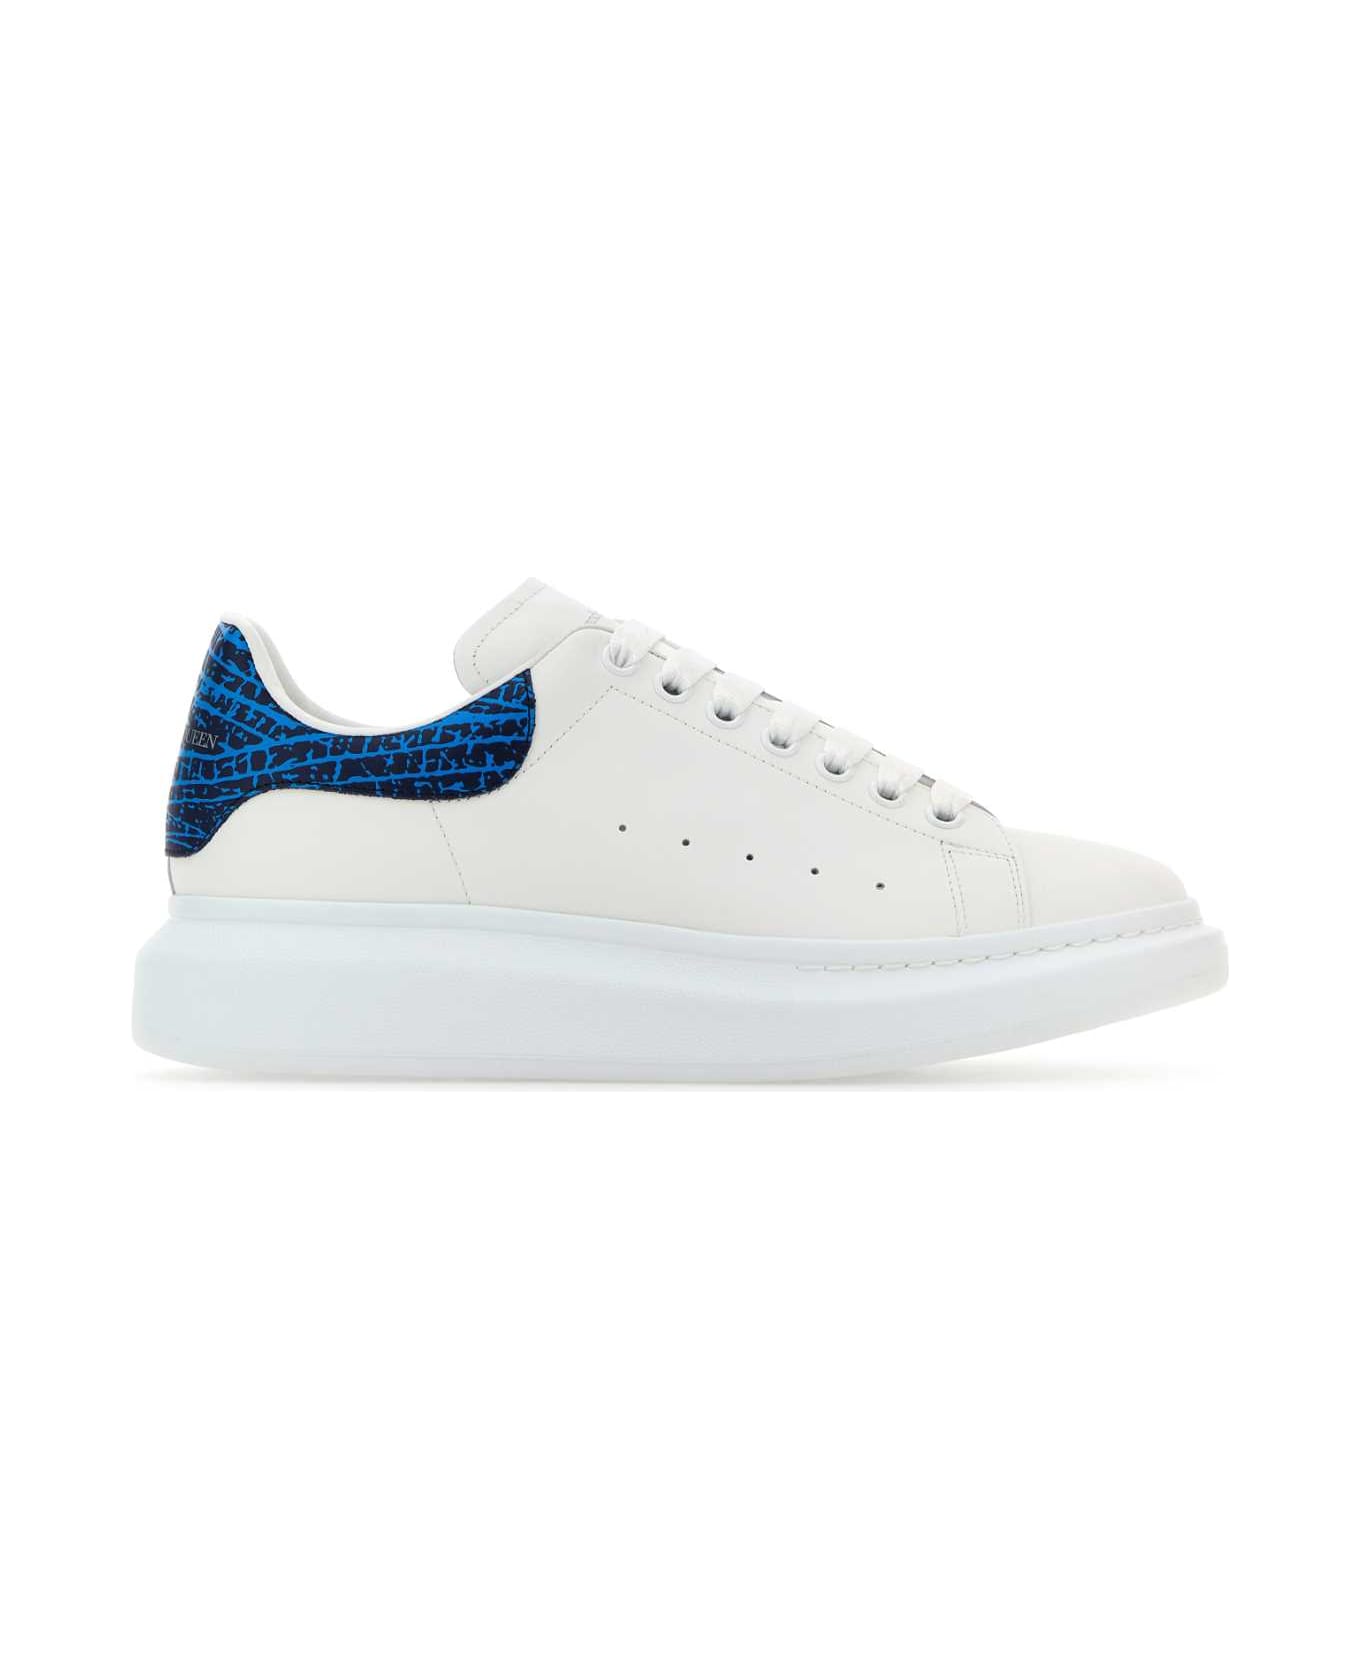 Alexander McQueen Sneakers With Printed Leather Heel - WHITELAPISBLUE スニーカー